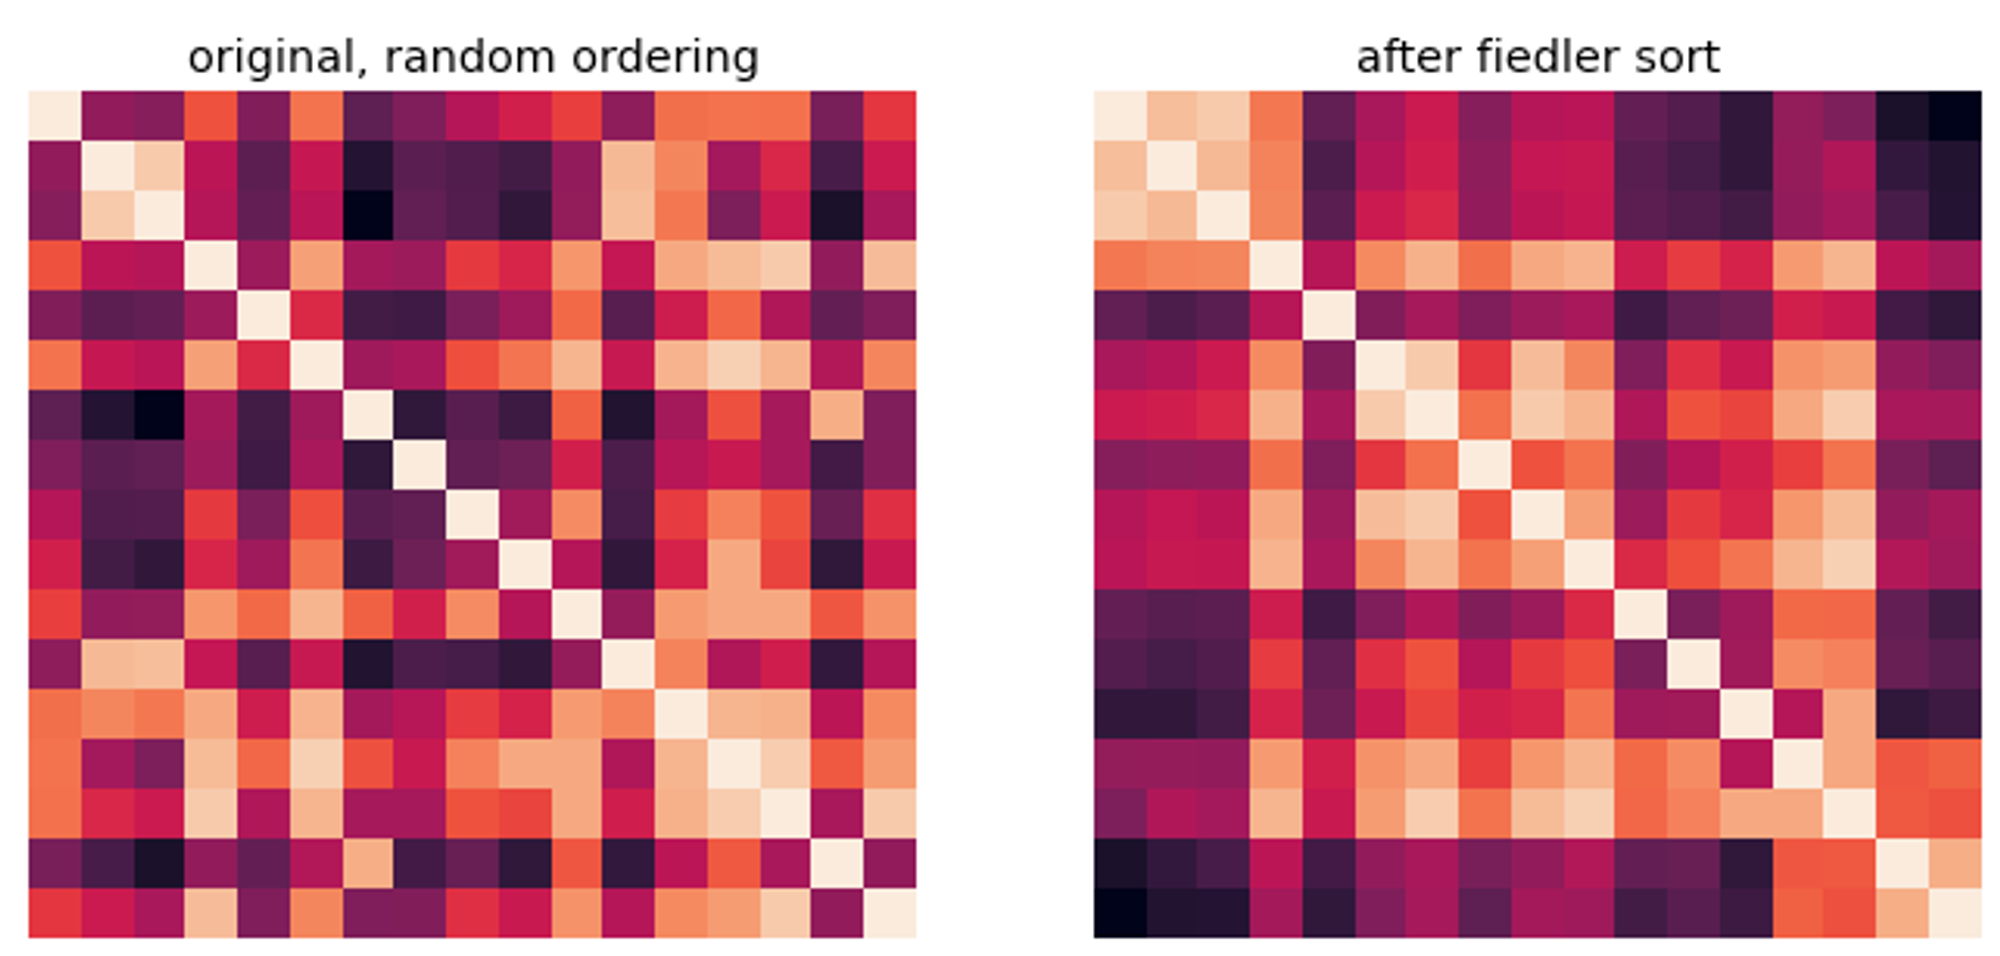 Figure 5. Heatmap visualizations of (left) the un-ordered matrix of varprox values and (right) the same matrix after reordering according to the Fiedler vector.